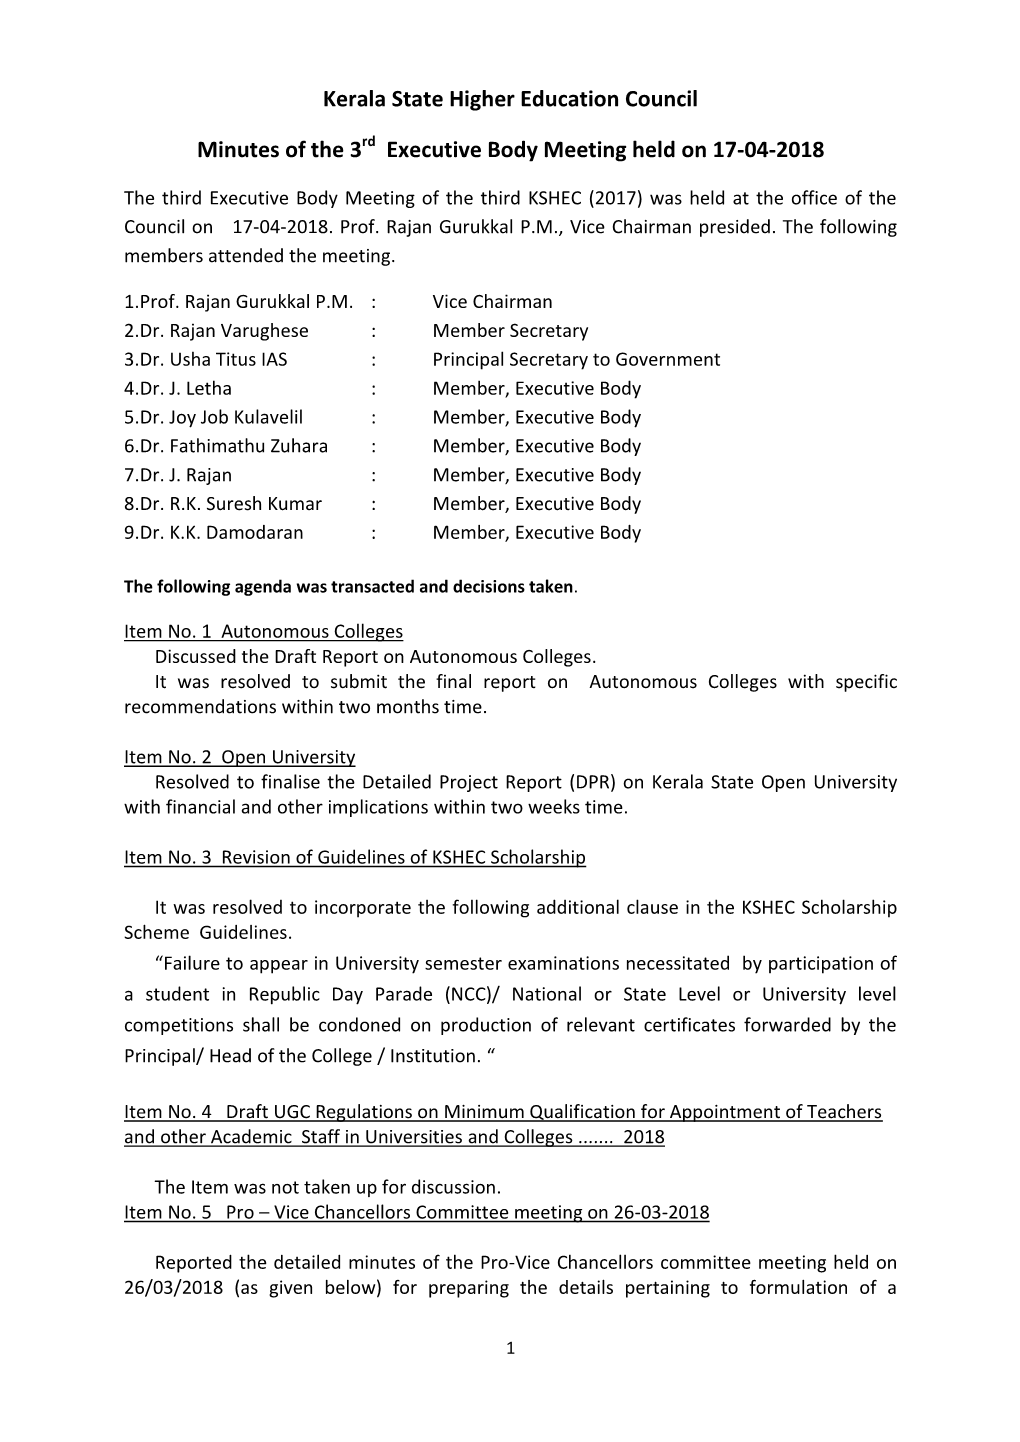 Kerala State Higher Education Council Minutes of the 3 Executive Body Meeting Held on 17-04-2018